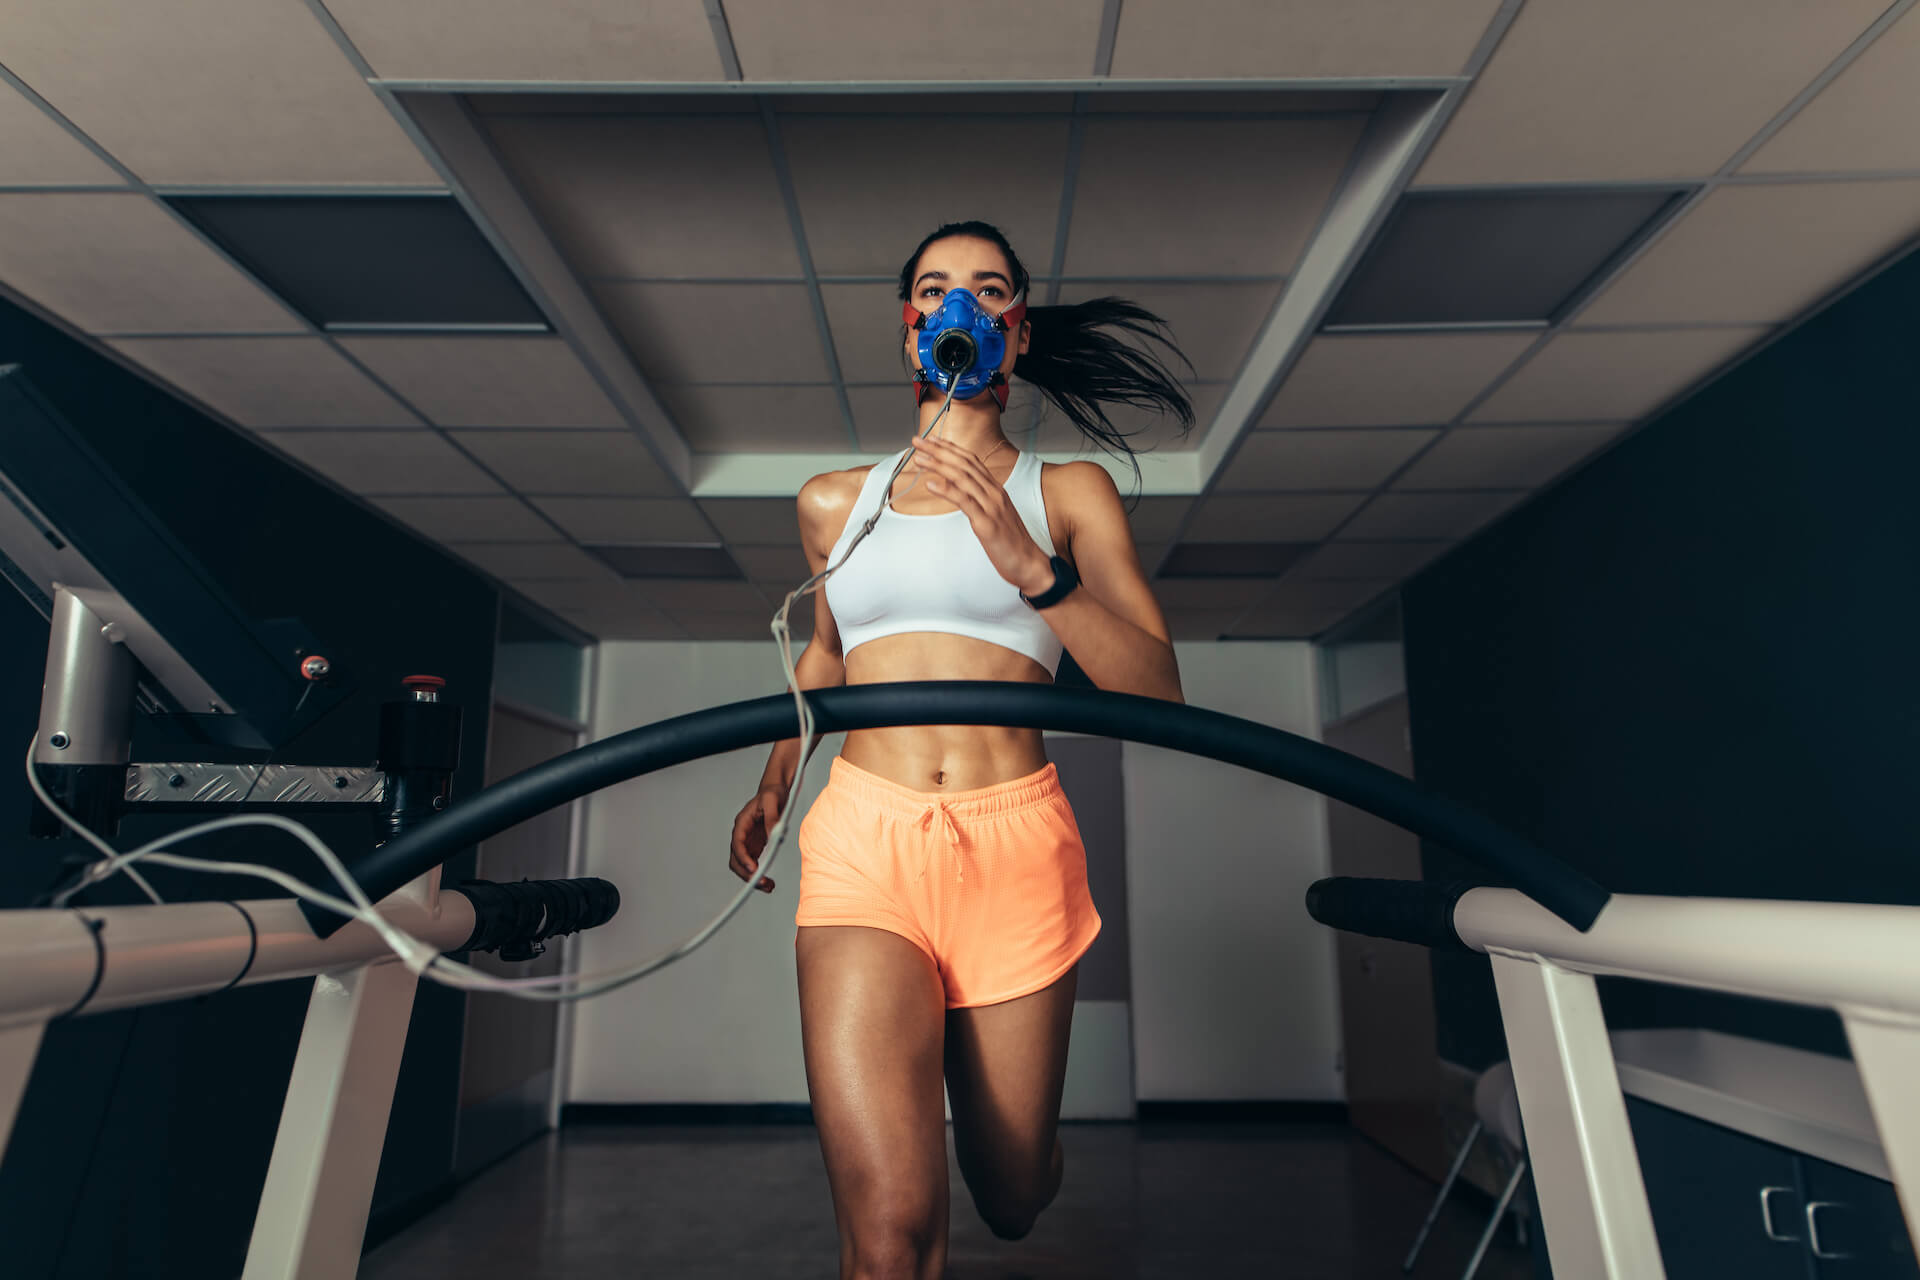 An Essential Guide to VO2 Max Testing